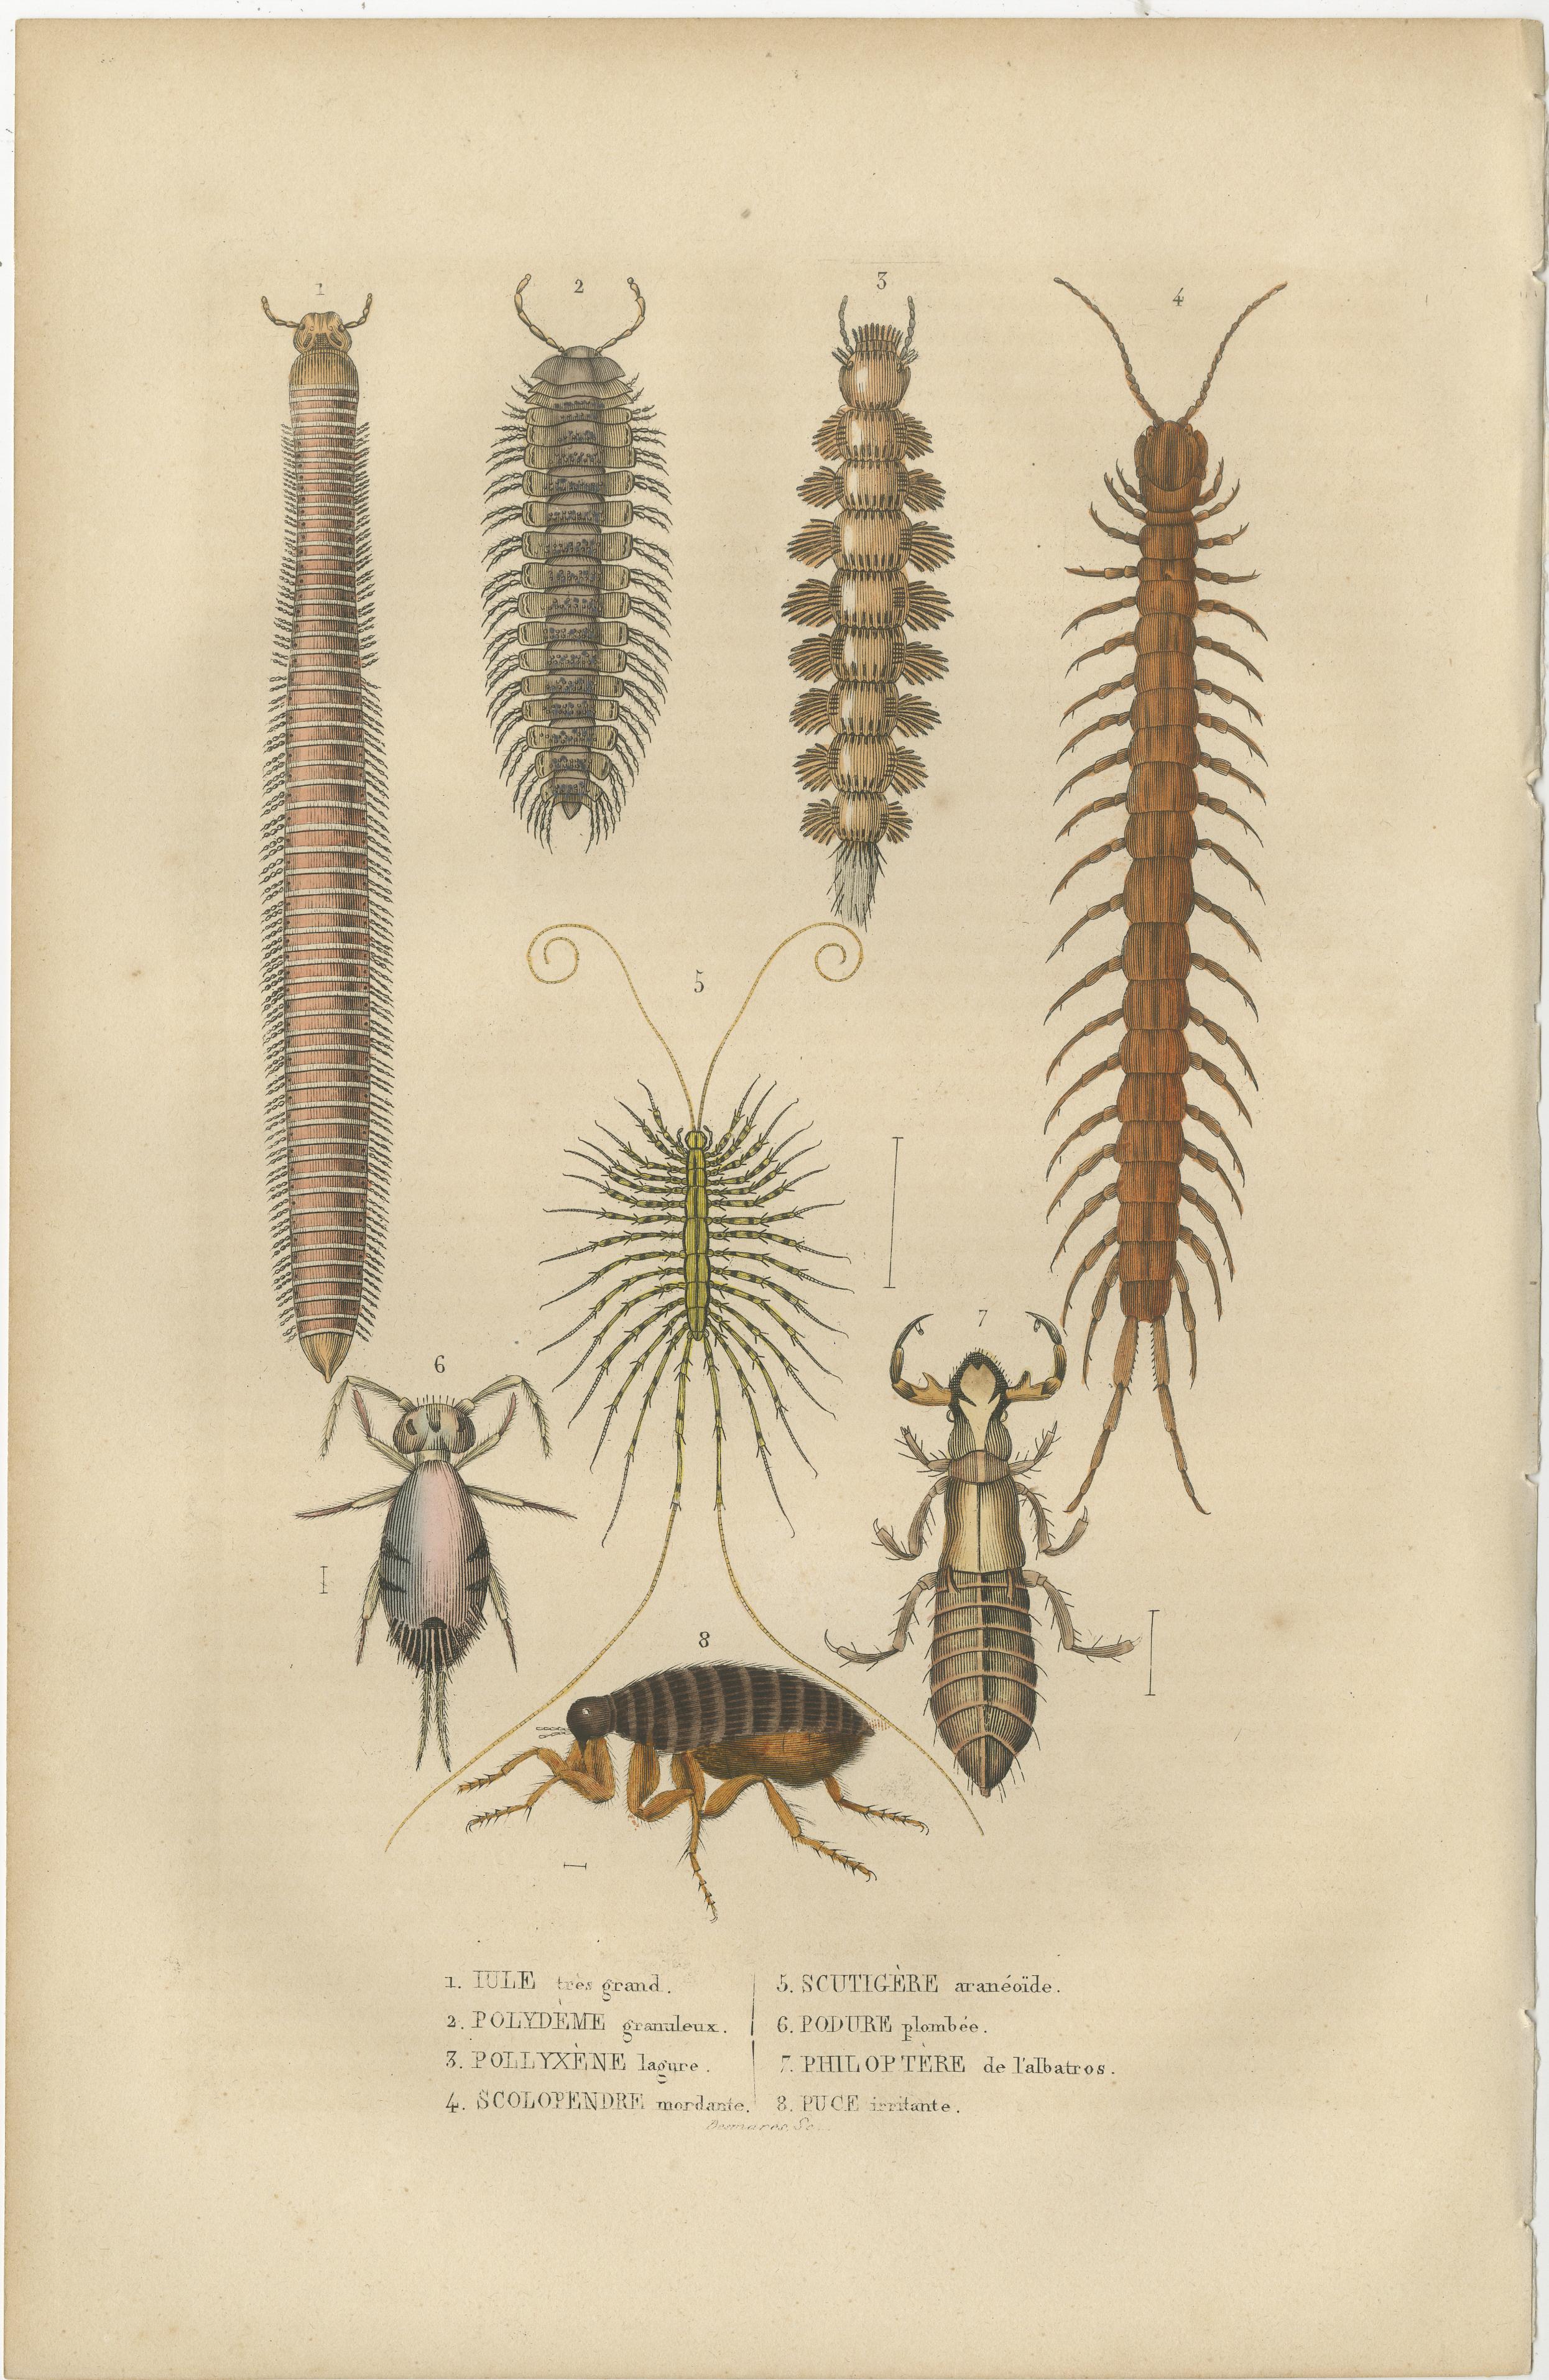 This image is a beautifully detailed handcolored engraving from 1845, featuring a series of marine invertebrates and insects. It includes eight specimens, each meticulously illustrated with a focus on anatomical accuracy and detail. The creatures